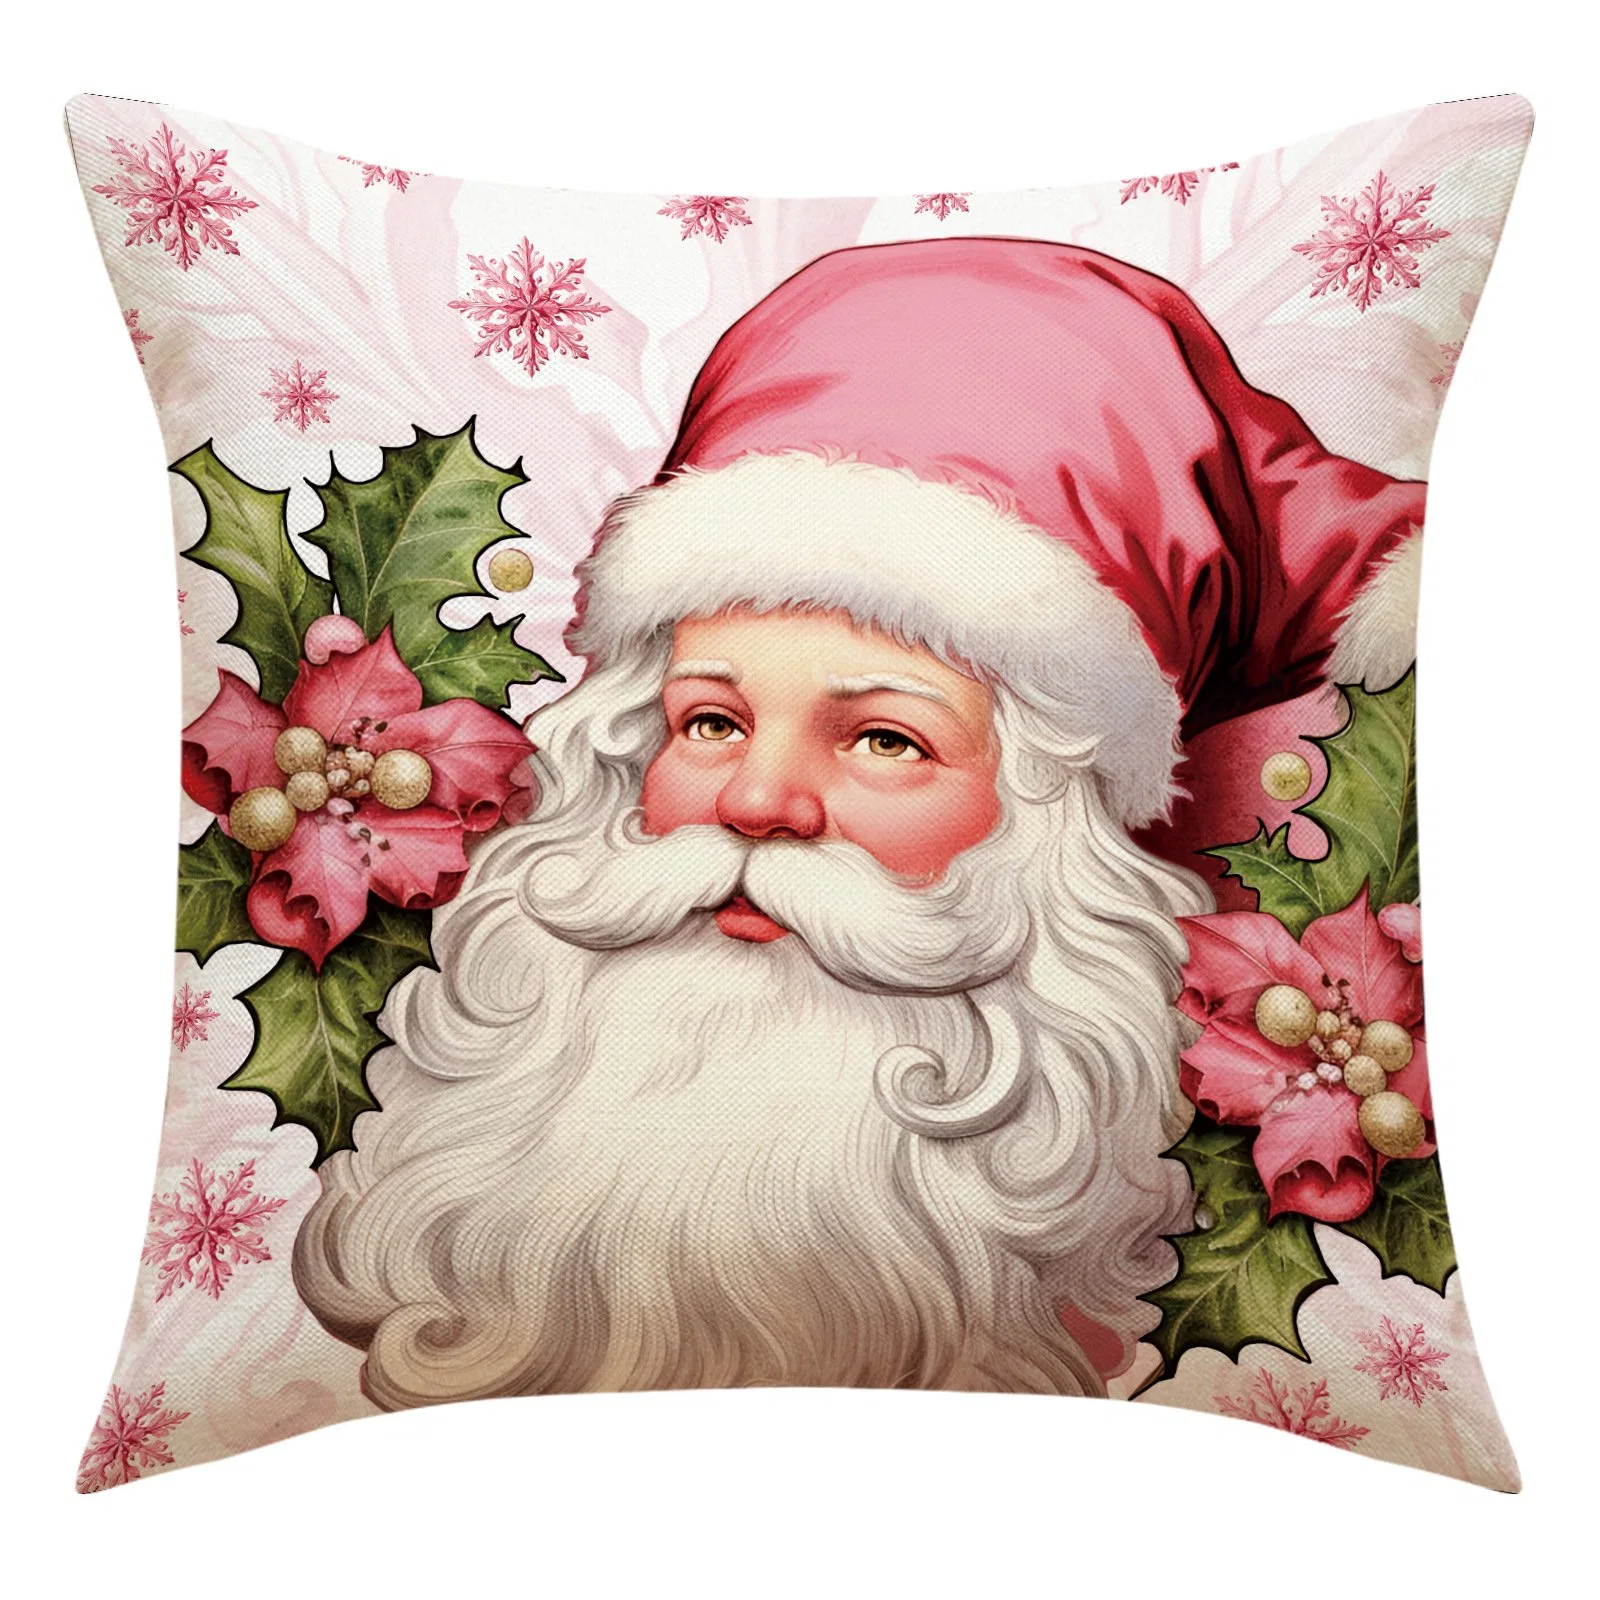 Printed Holiday Decoration Christmas Linen Letter Living Room Sofa Cushion Cover Pillow